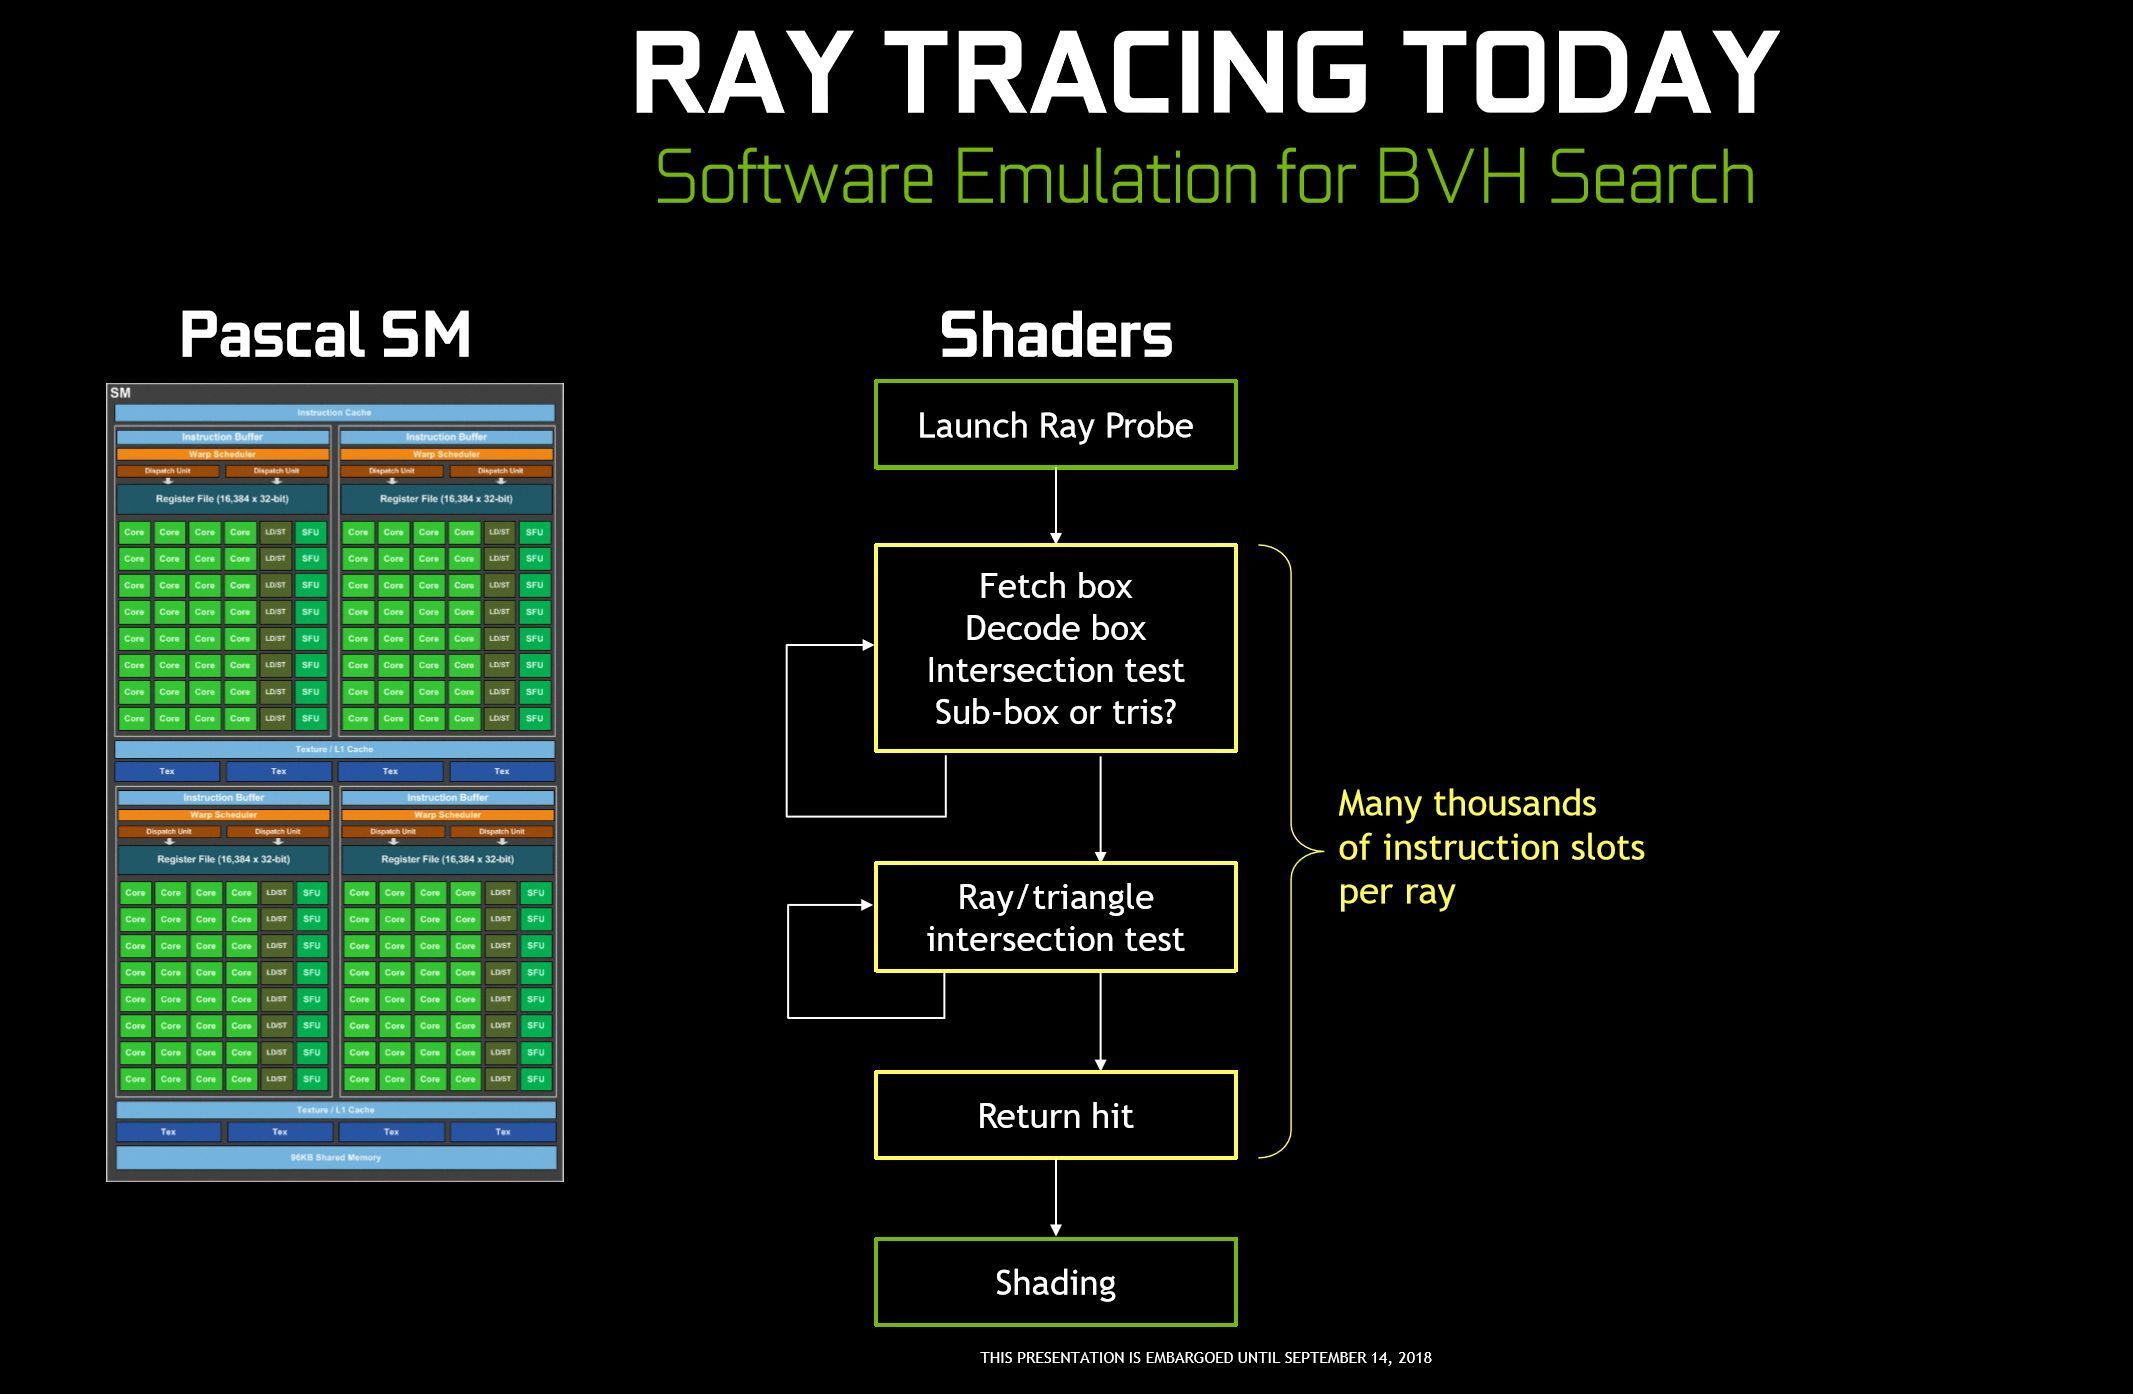 Sony patents method for “significant improvement of ray tracing speed”